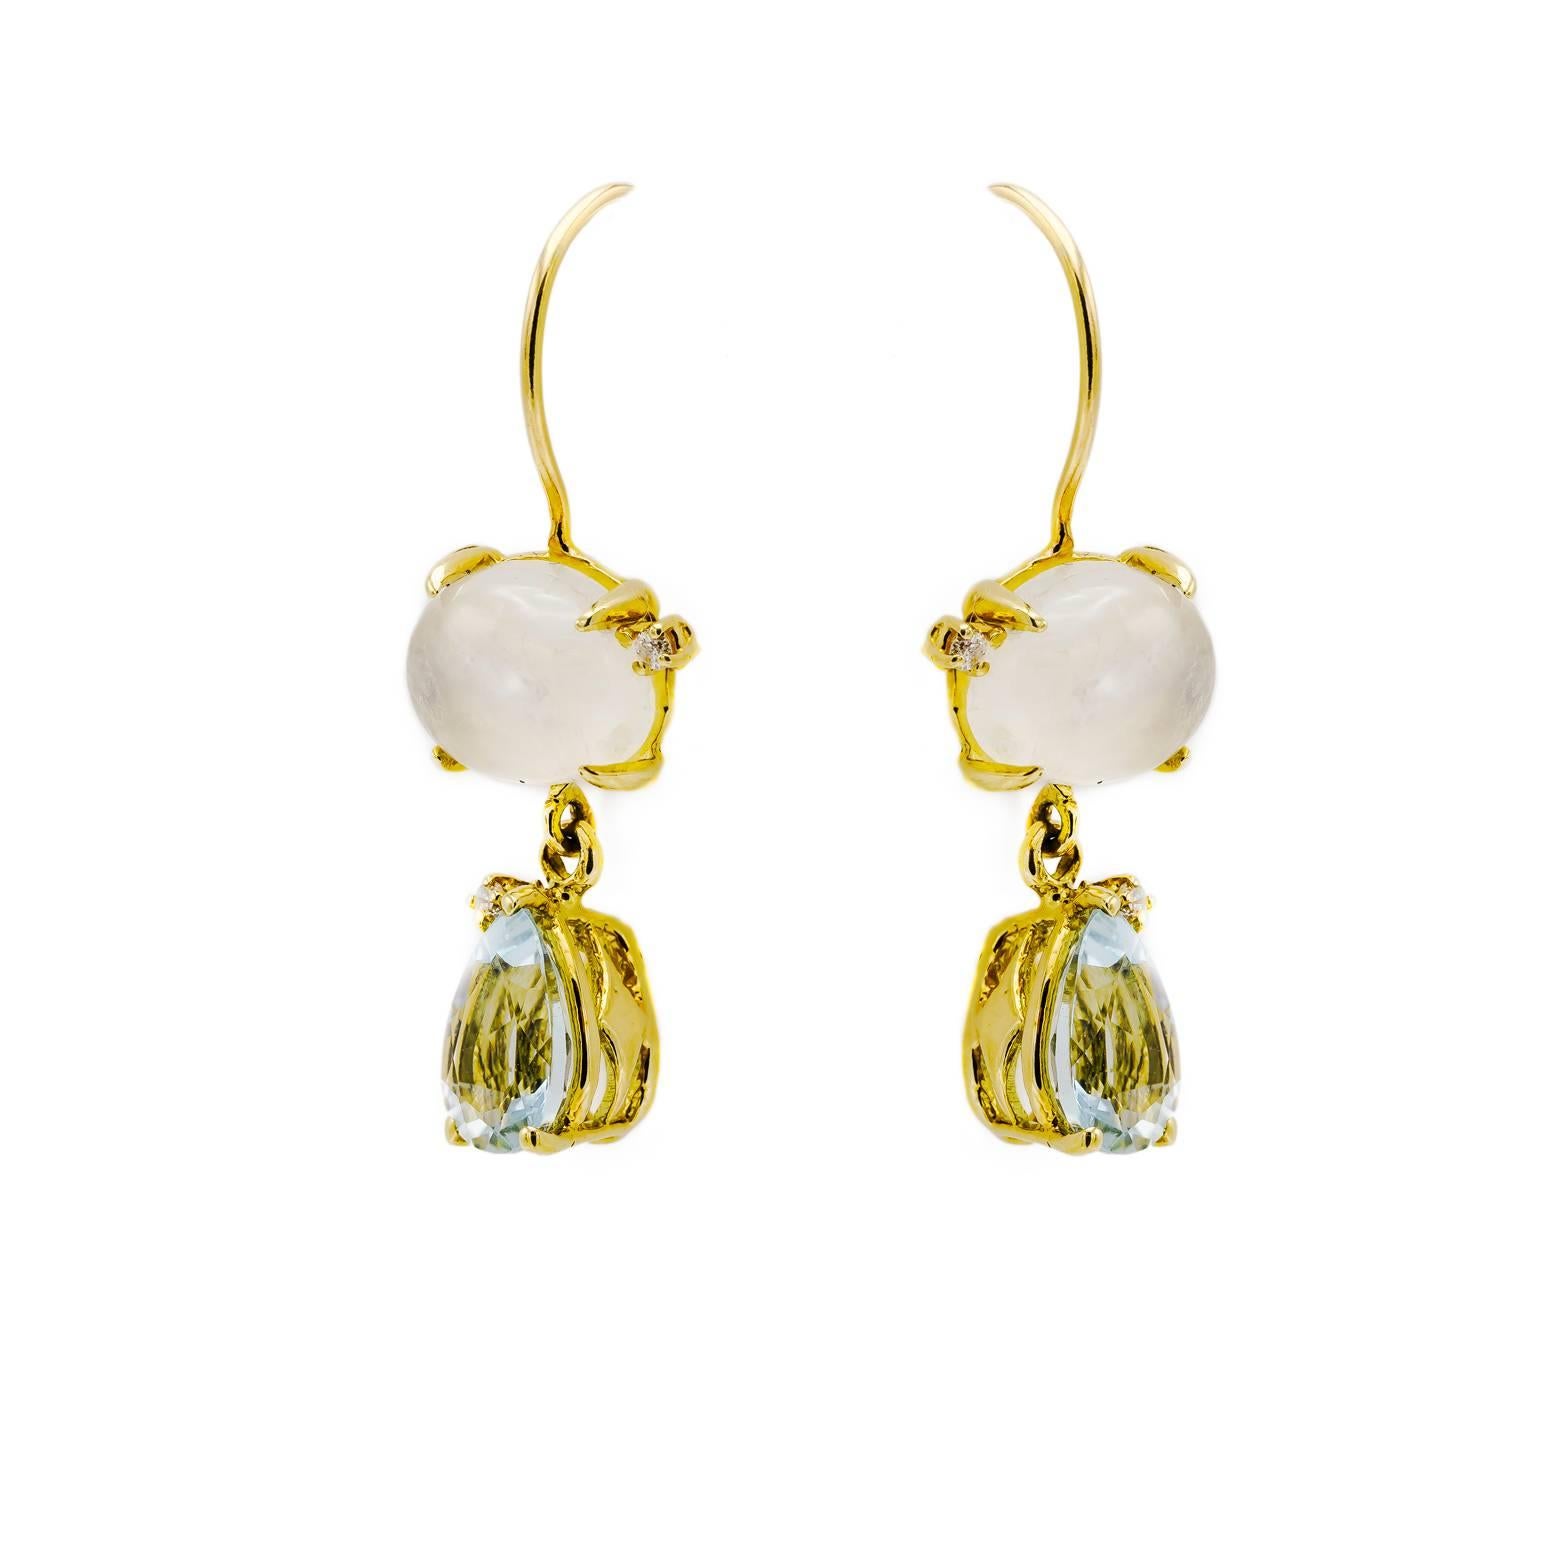 These stunning and elegant earrings are oval moonstones with faceted pear aquamarines decorated and four diamonds. 18K Yellow Gold create the perfect bezel and frame for these dangle drop earrings. 